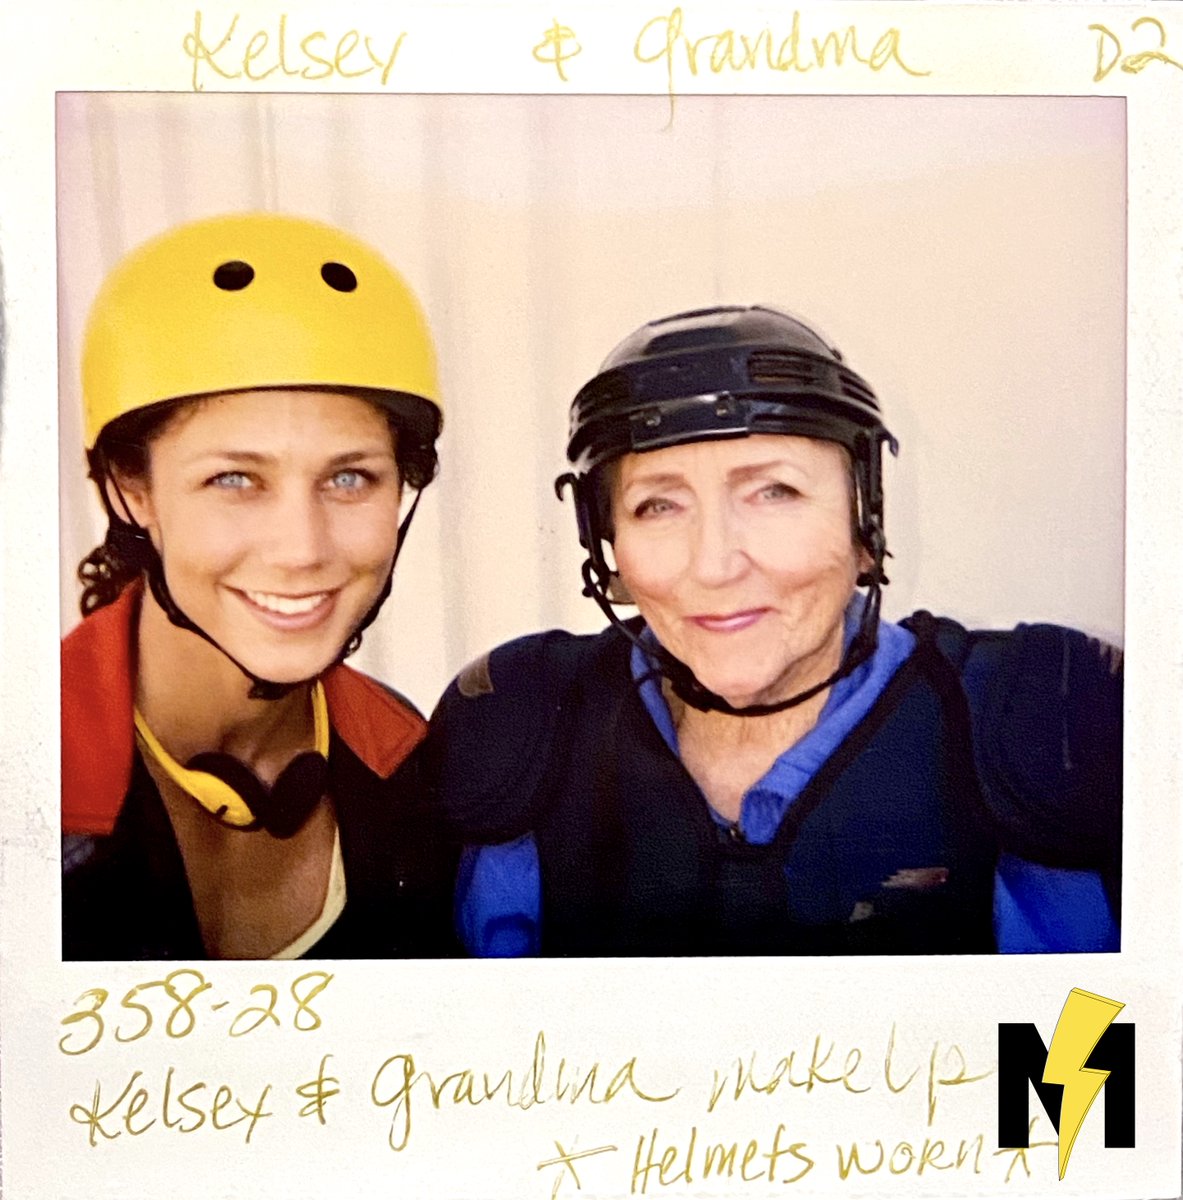 Our #GrandparentsDay exhibit goes out to Grandma Winslow and the most precious thing in the world to her — her granddaughter Kelsey [Lightspeed Yellow]. 💛

#MorphinMuseum Exhibit 0266 ⚡️
Series: #PowerRangers #LightspeedRescue
Episode: The Fifth Crystal
Year: 2000 #RangerHistory